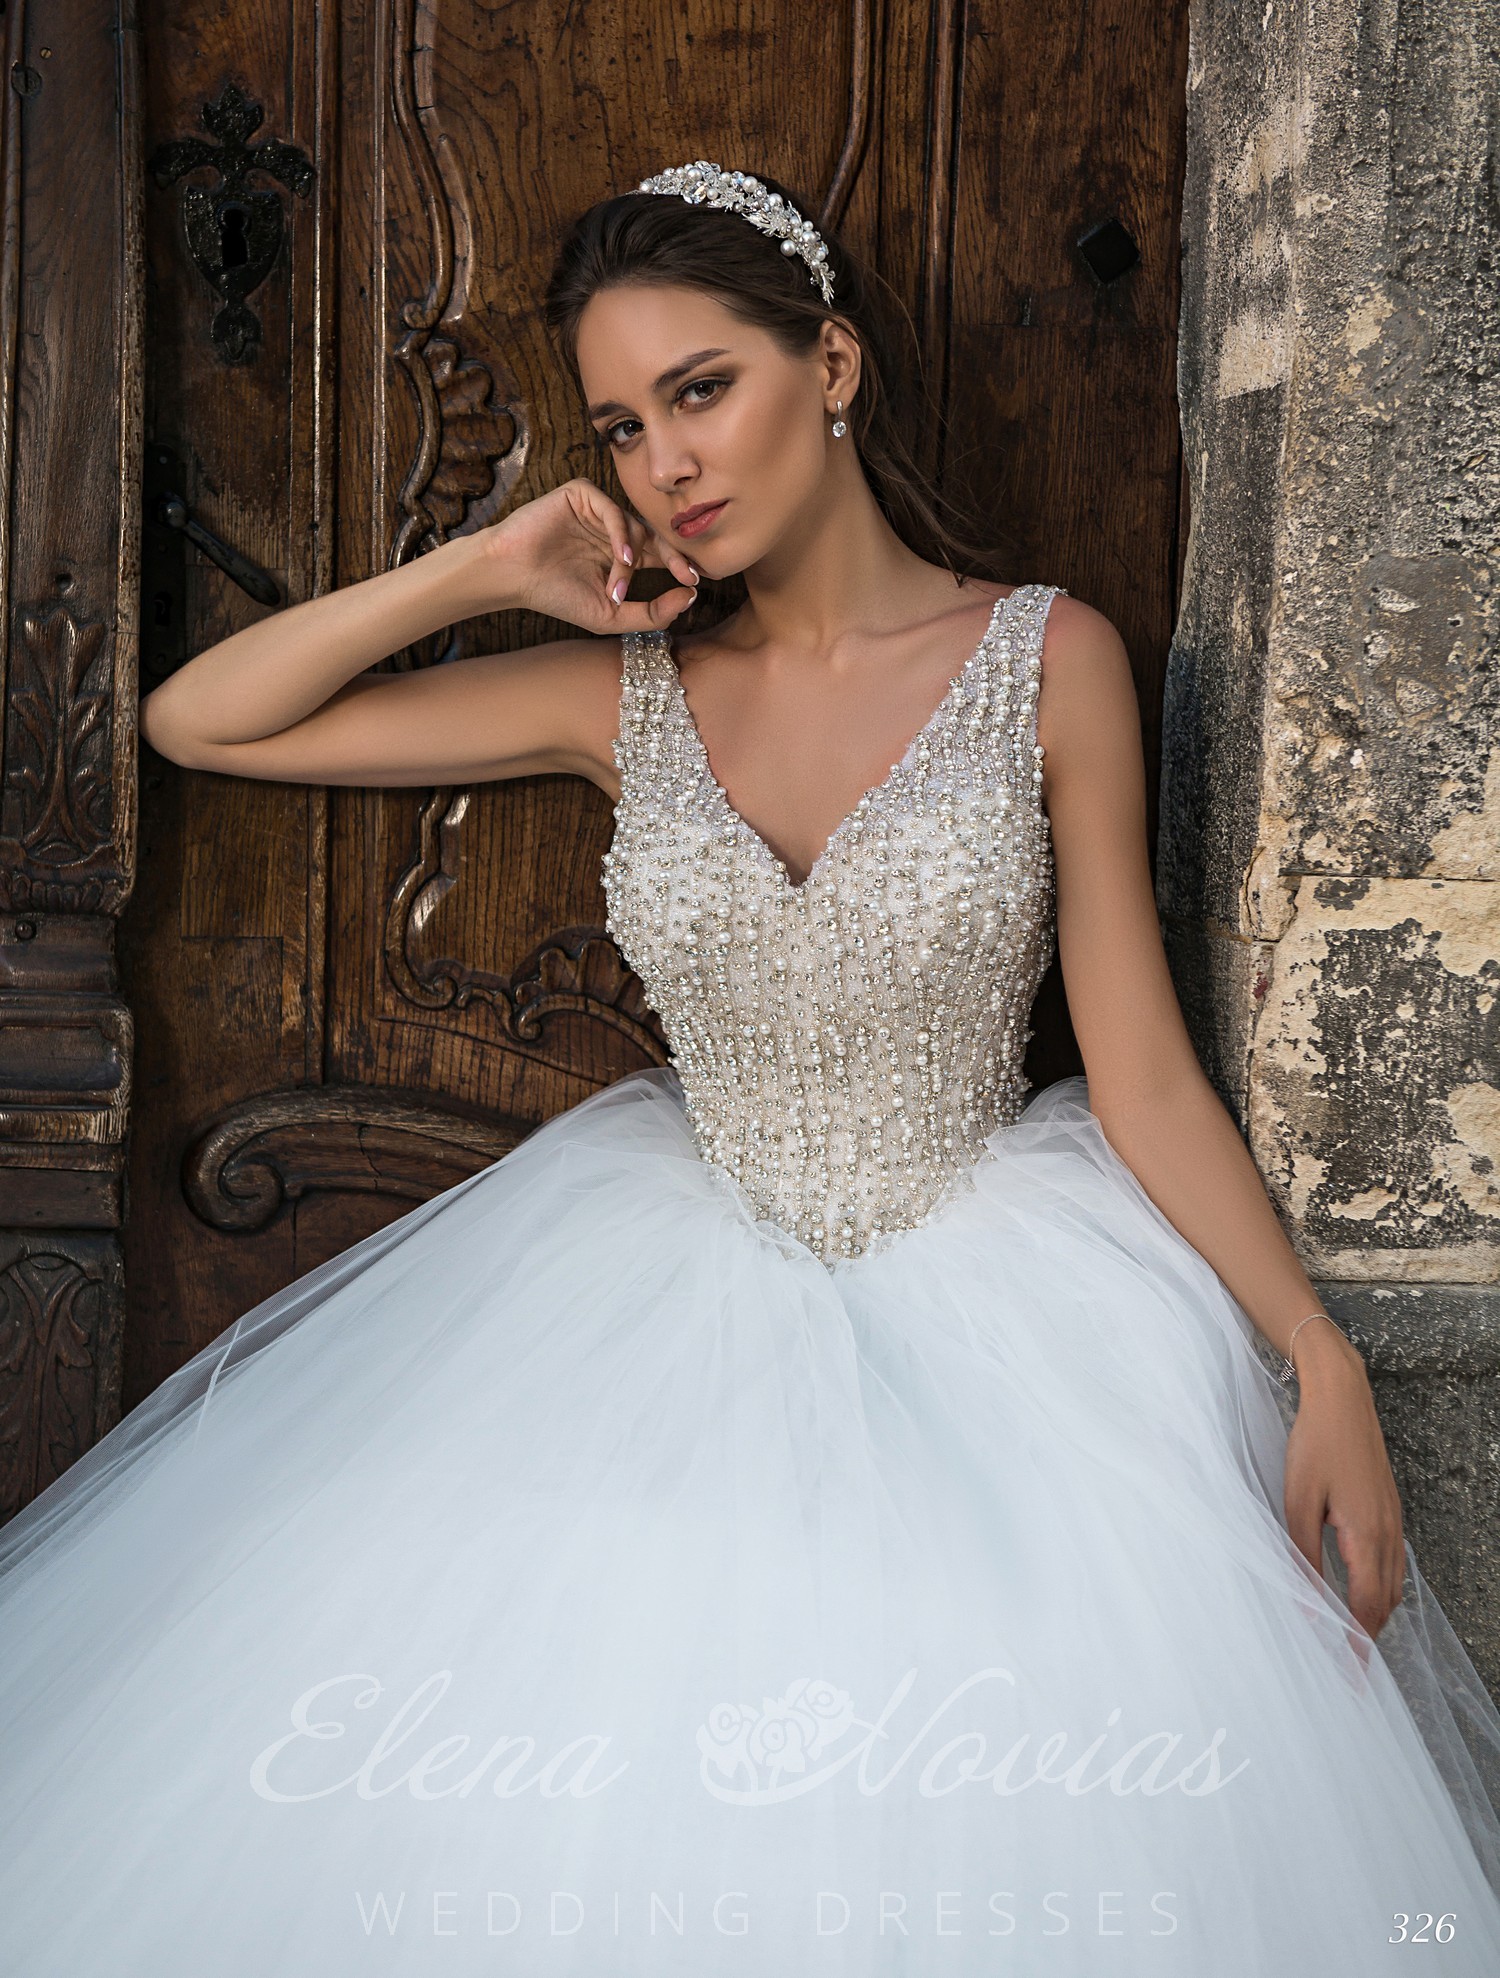 Lush embroidered wedding dress with V-neck